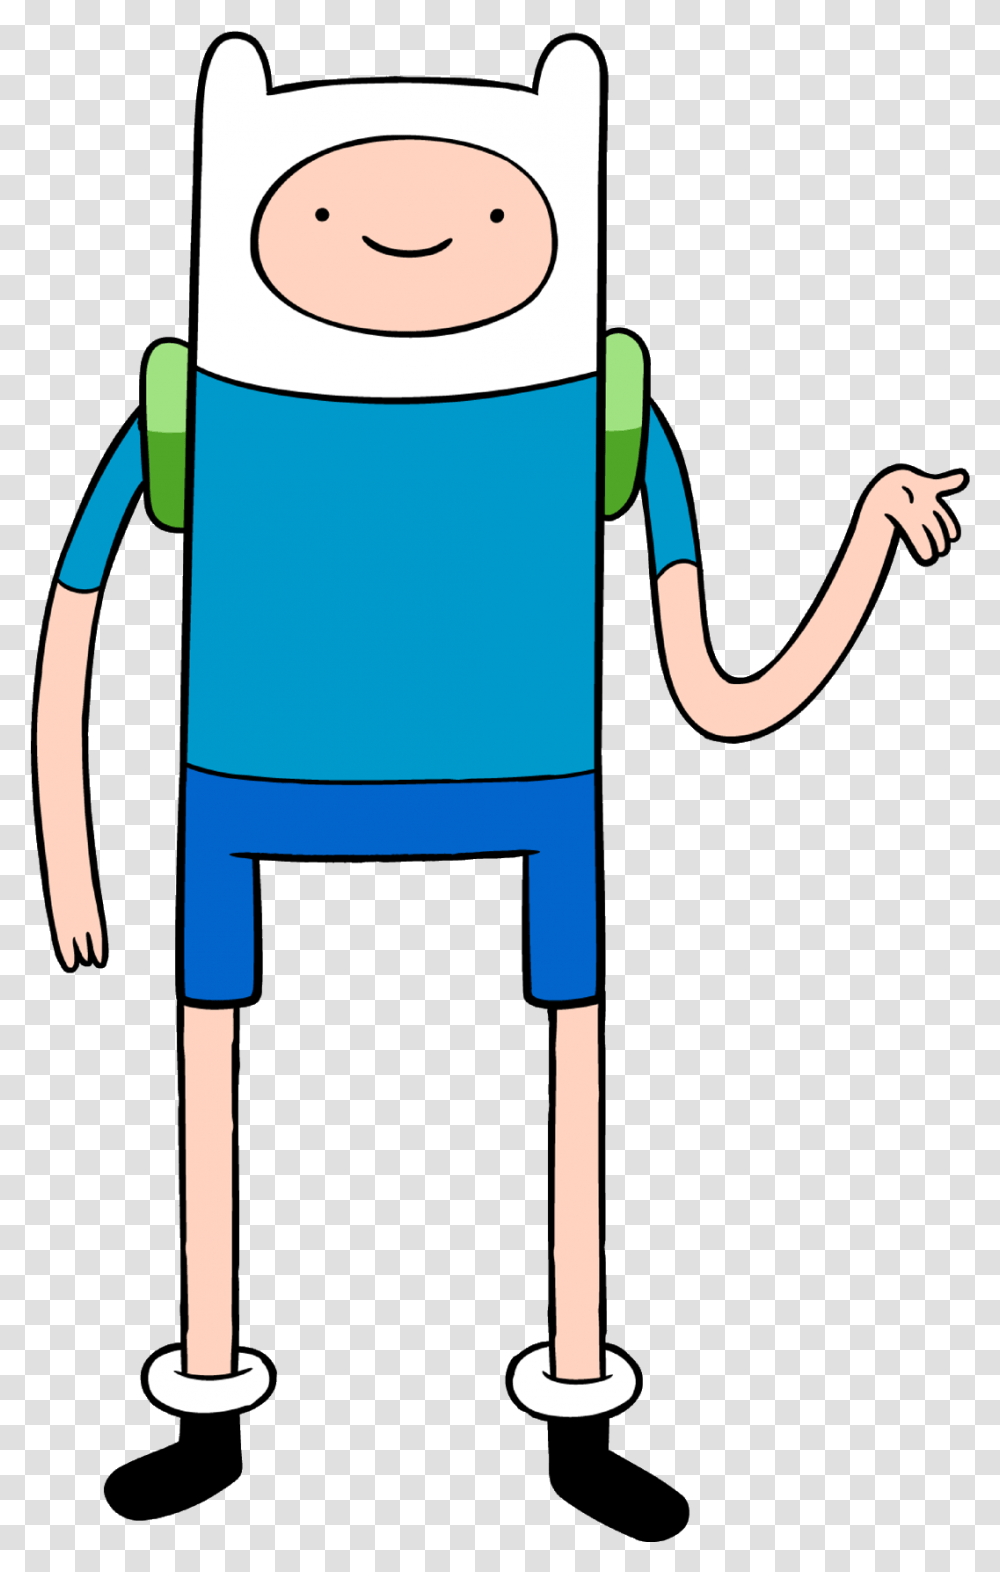 Adventure Time Finn The Human Clip Arts Finn Adventure Time Characters, Chair, Furniture, Green, Outdoors Transparent Png